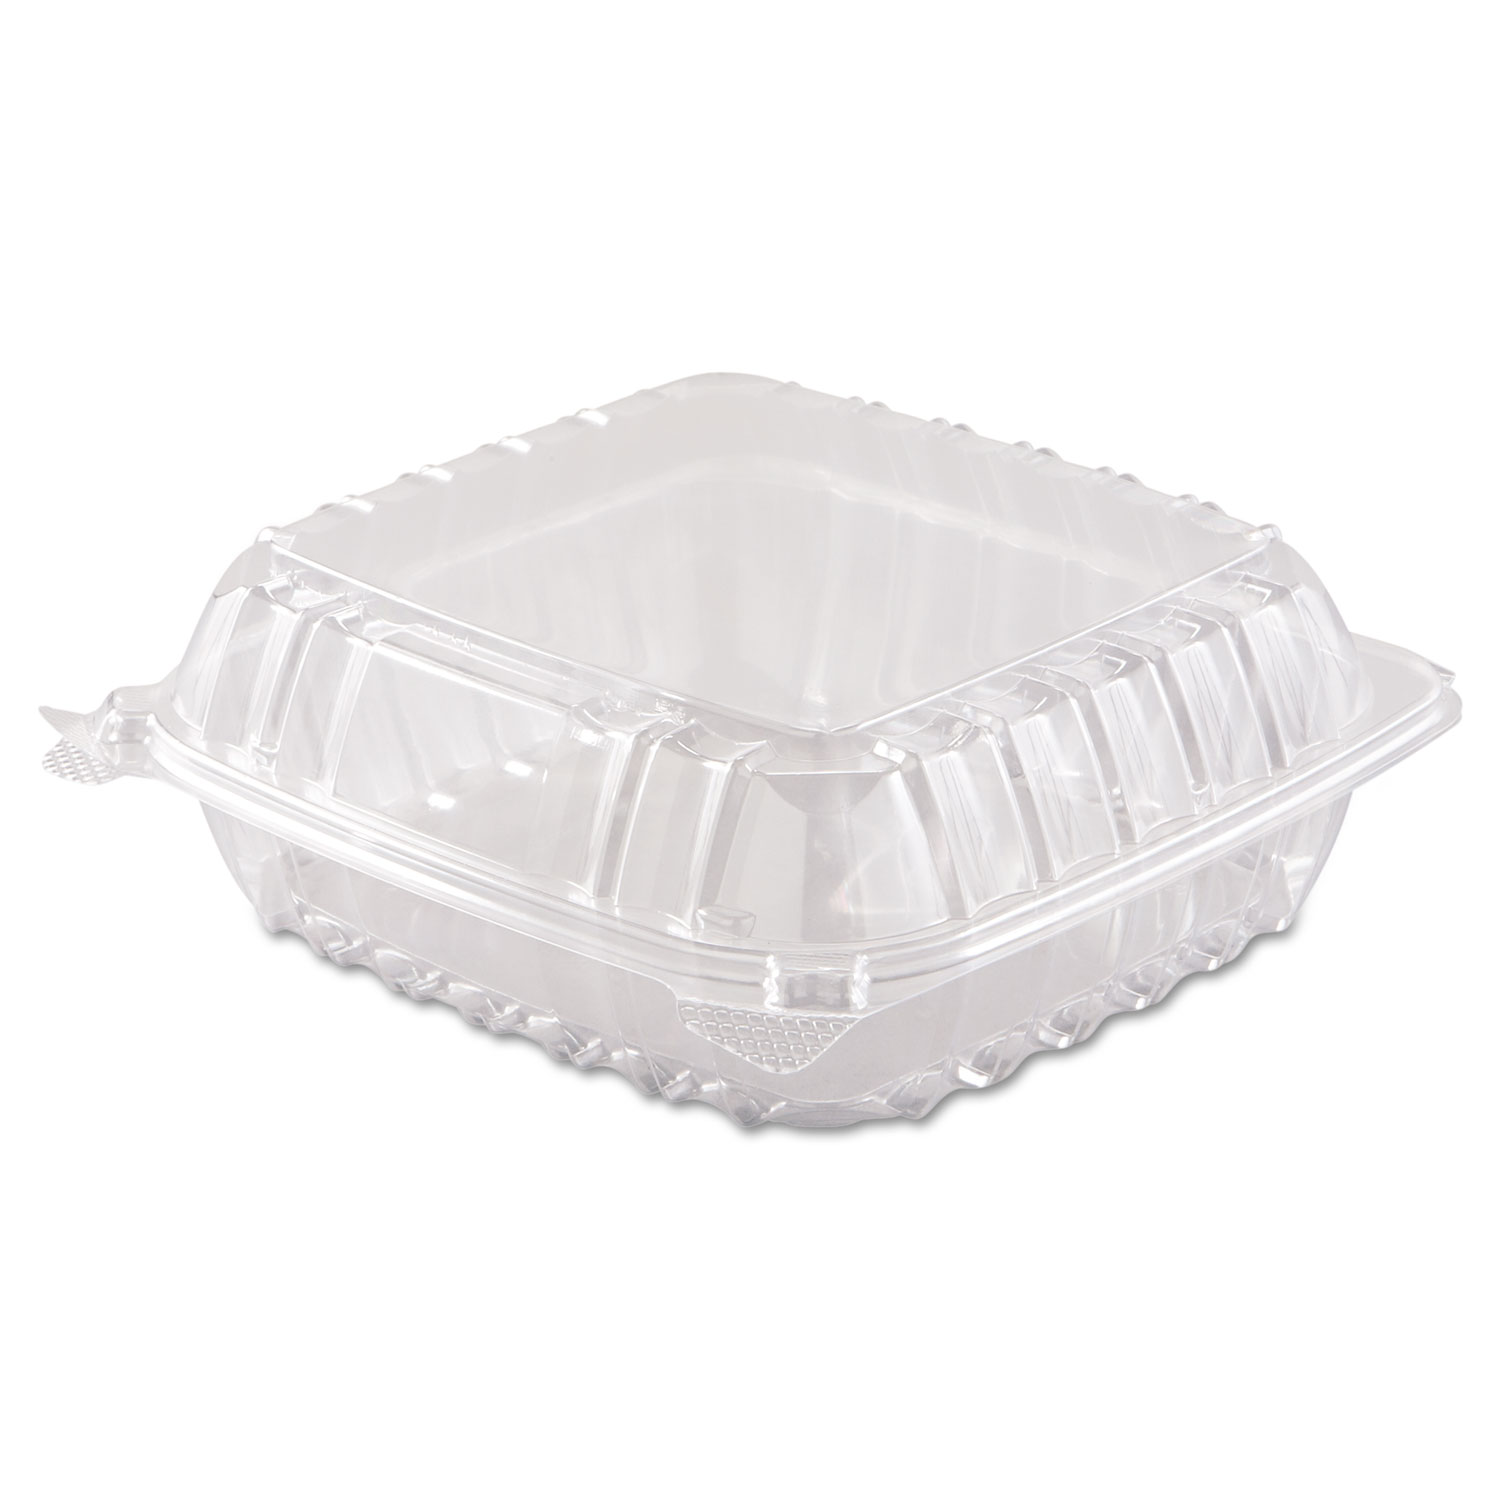  Dart C90PST1 ClearSeal Hinged-Lid Plastic Containers, 8 3/10 x 8 3/10 x 3, Clear, 250/Carton (DCCC90PST1) 